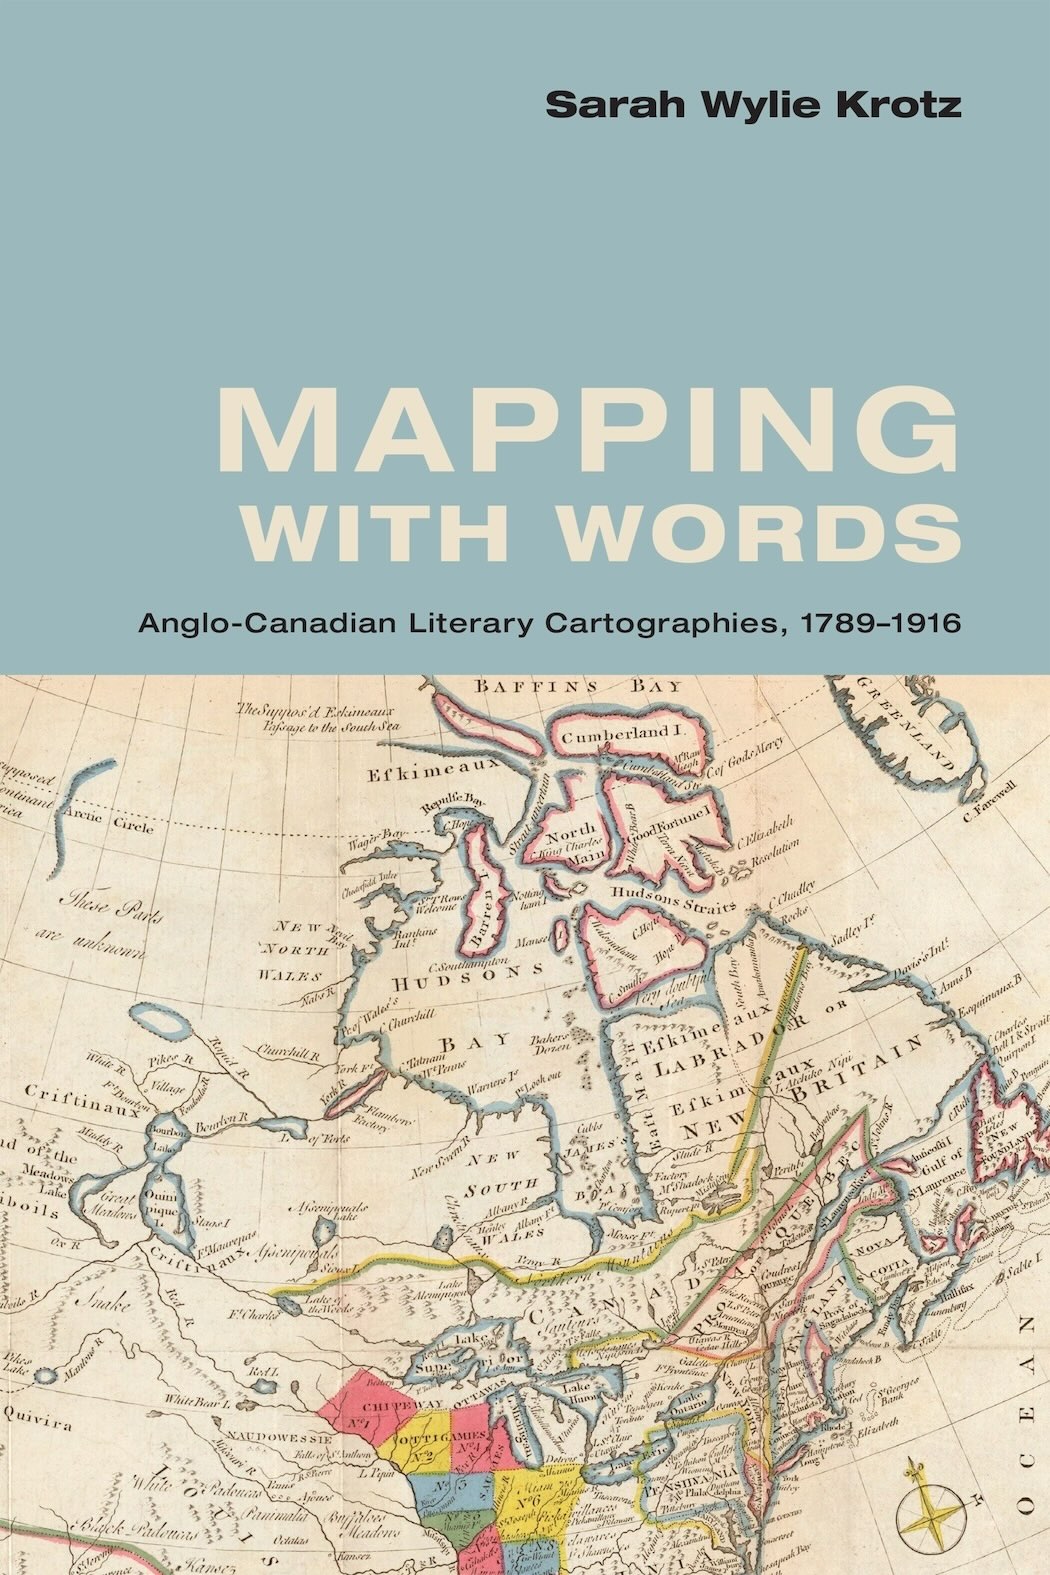 Cover Image of Sarah Krotz's Book Titled Mapping With Words